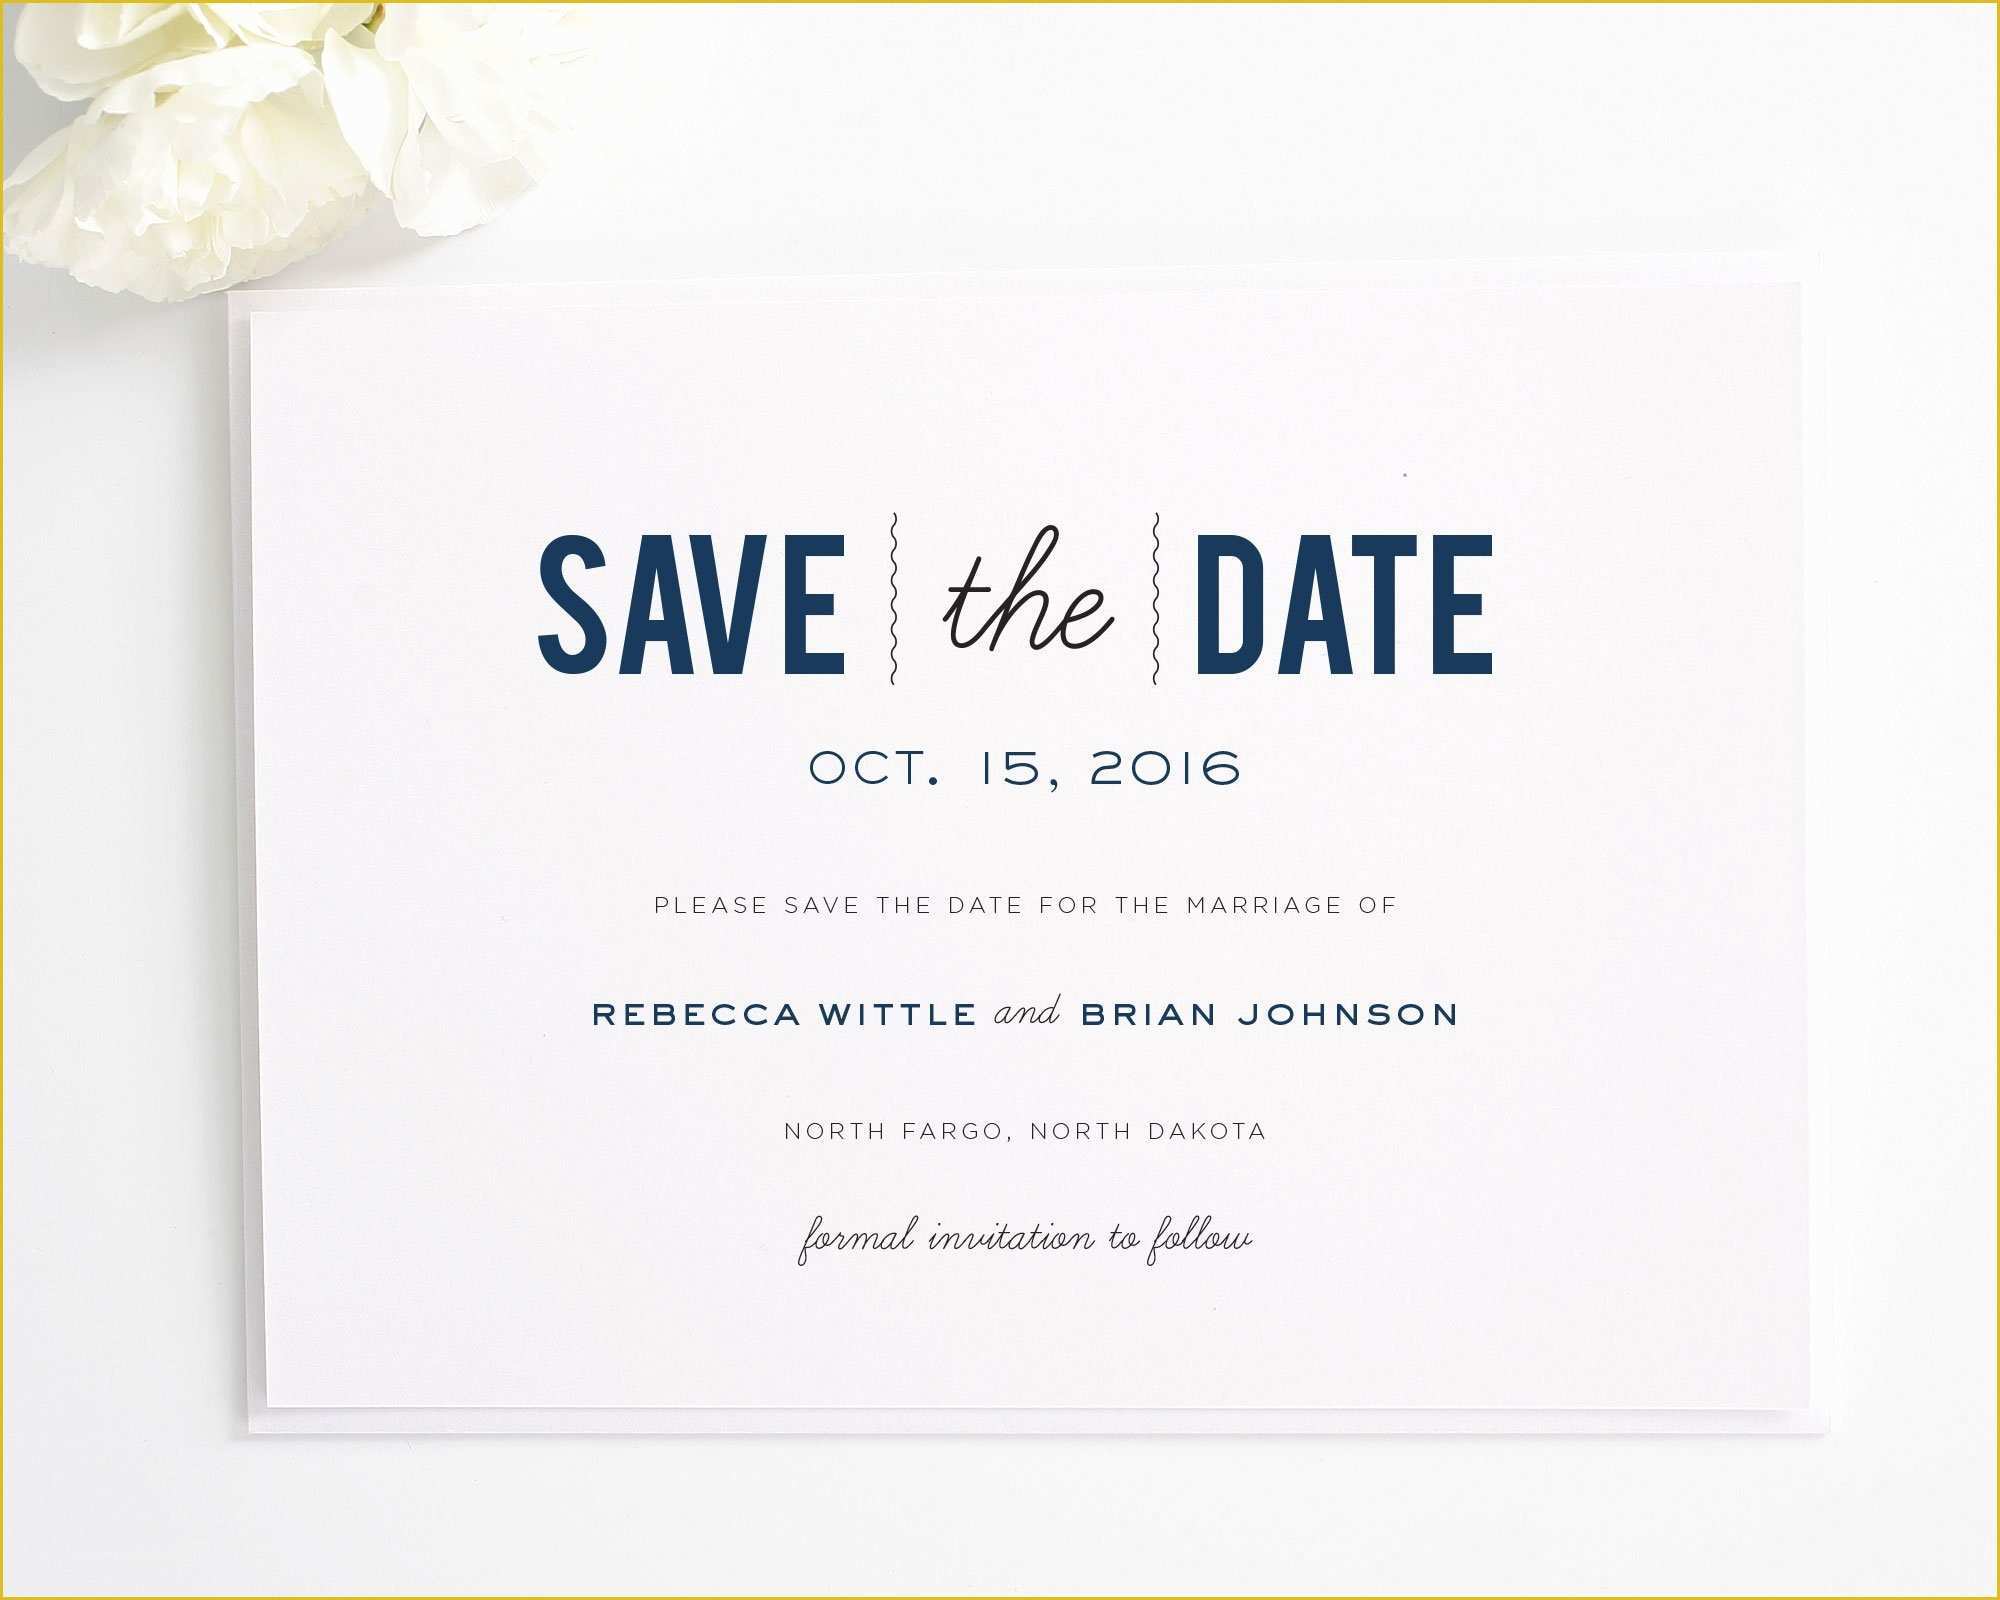 Free Printable Save the Date Invitation Templates Of Date Monogram Save the Date Cards Save the Date Cards by